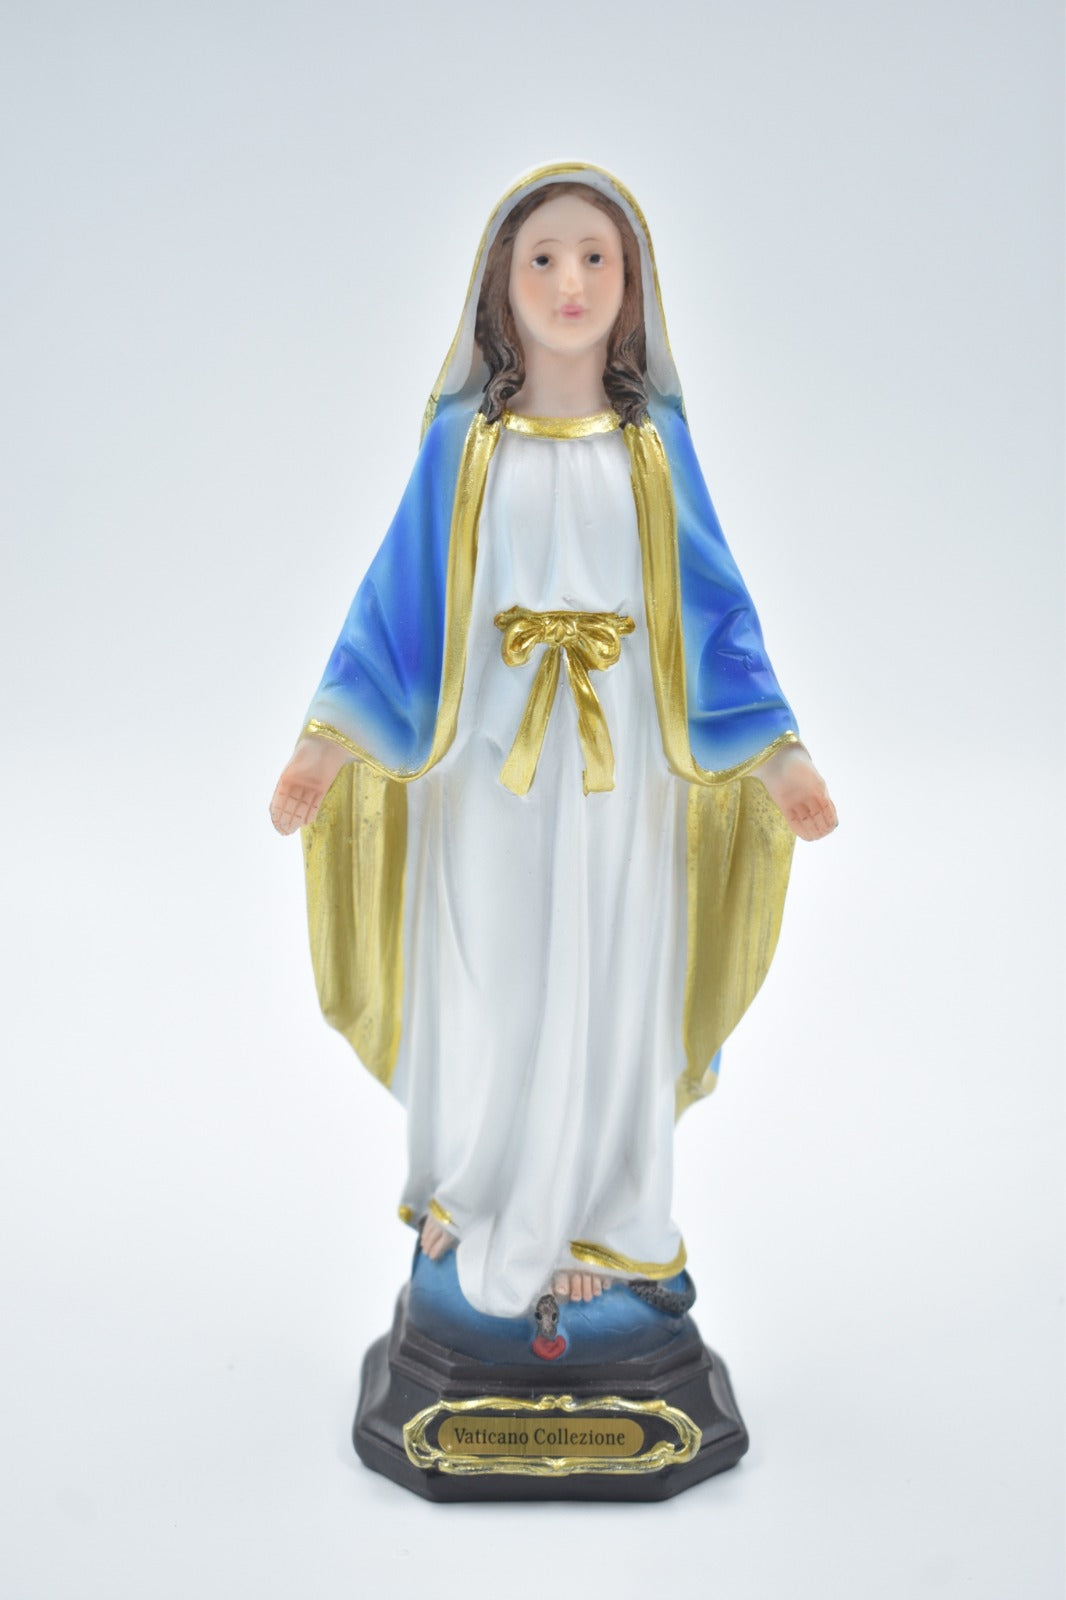 Mary Immaculate 8 Inch Statue - Beautiful Religious Figurine for Devotion and Decoration